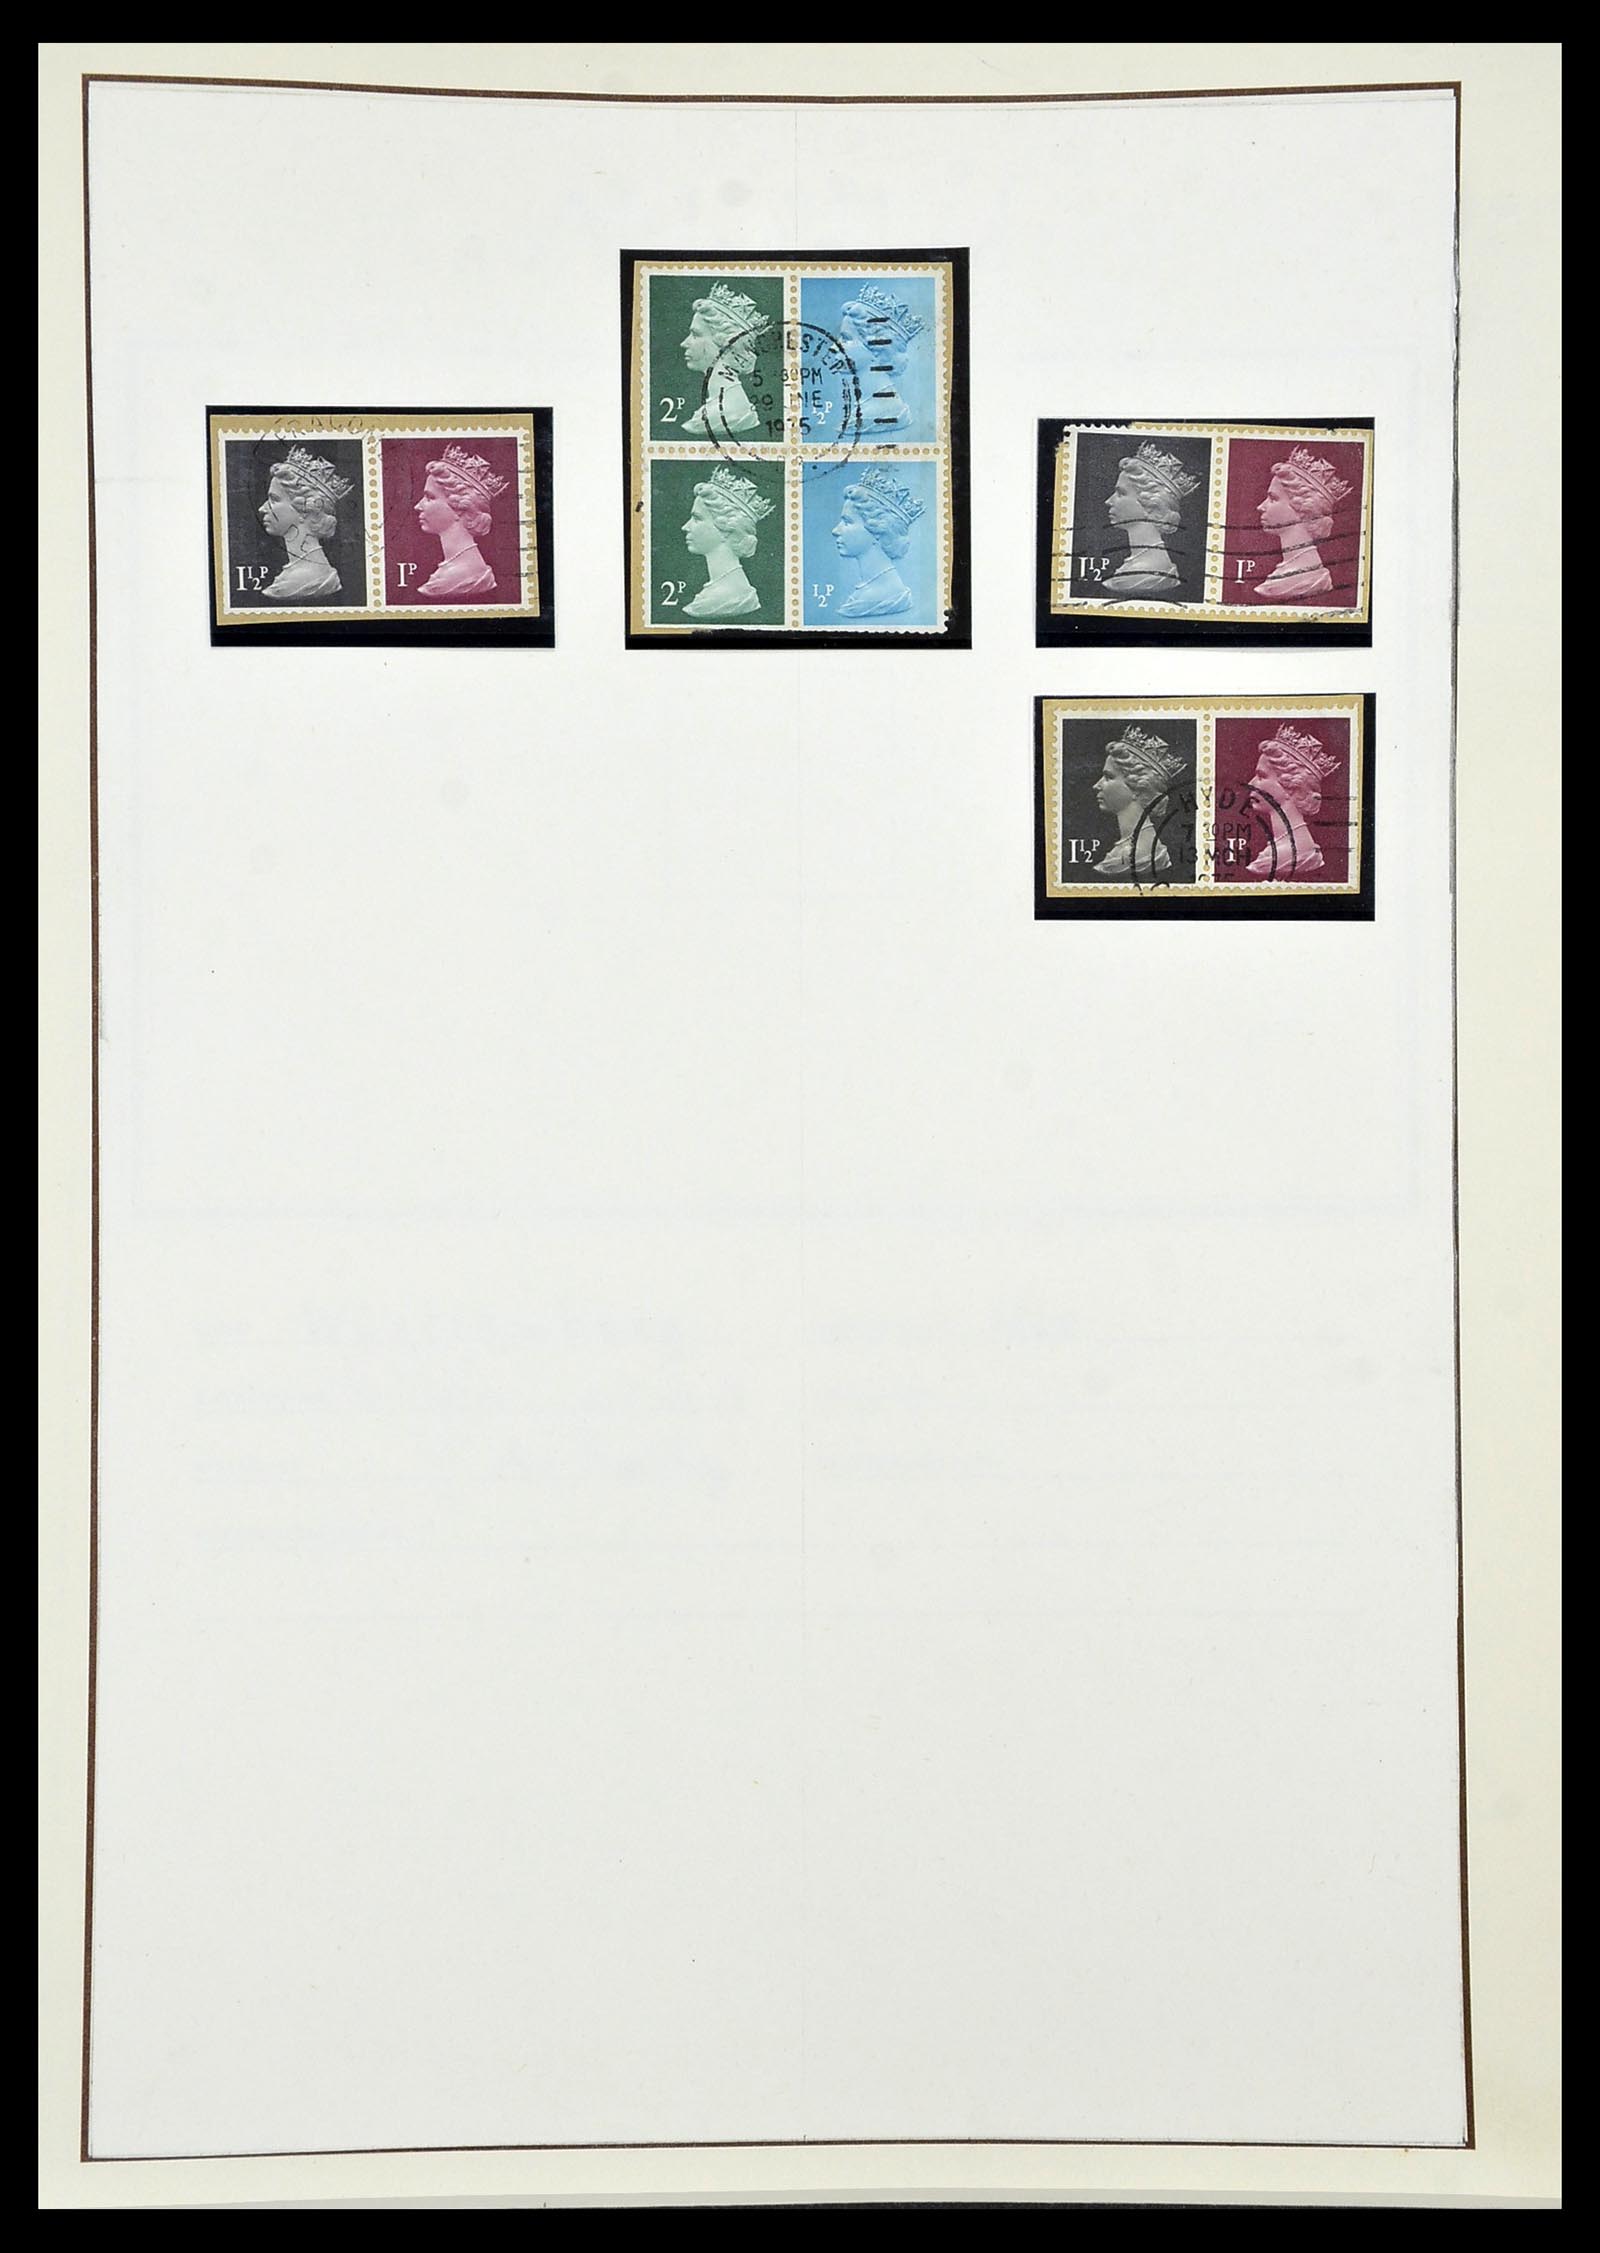 34221 193 - Stamp collection 34221 Great Britain Machins/castles 1971-2005.